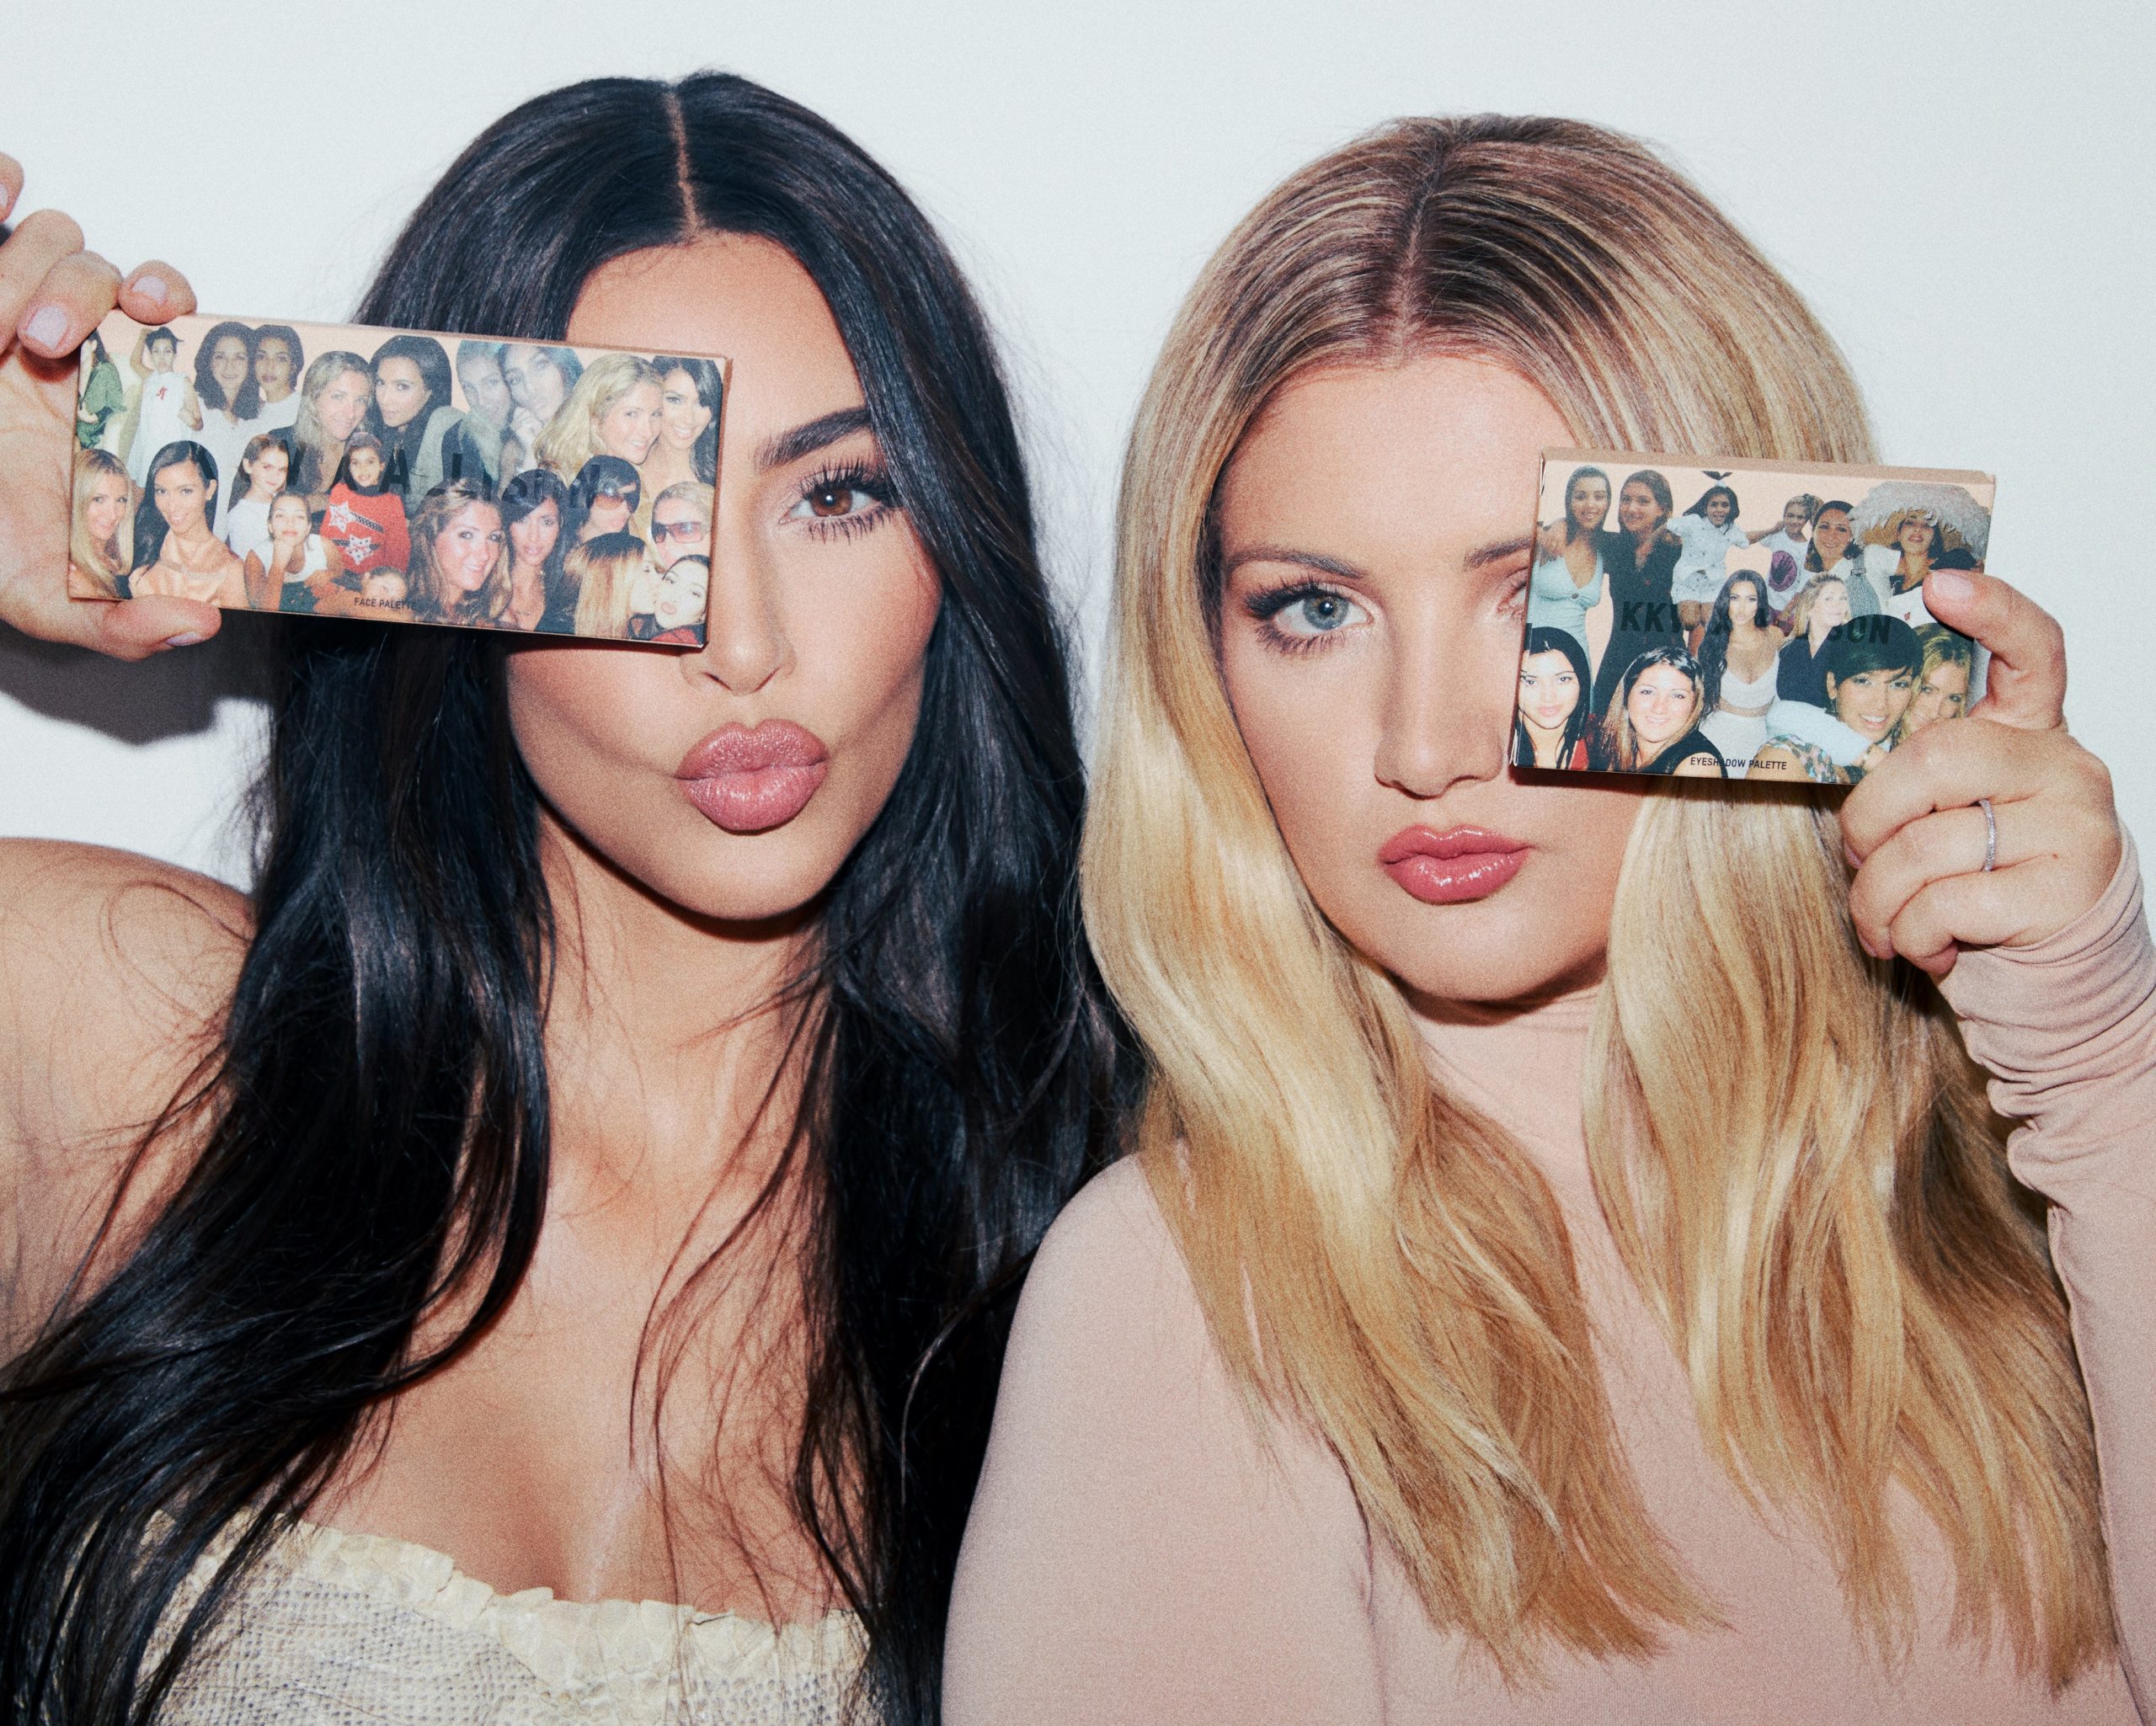 Interview: Kim Kardashian and BFF Allison Statter on Their Makeup Collaboration